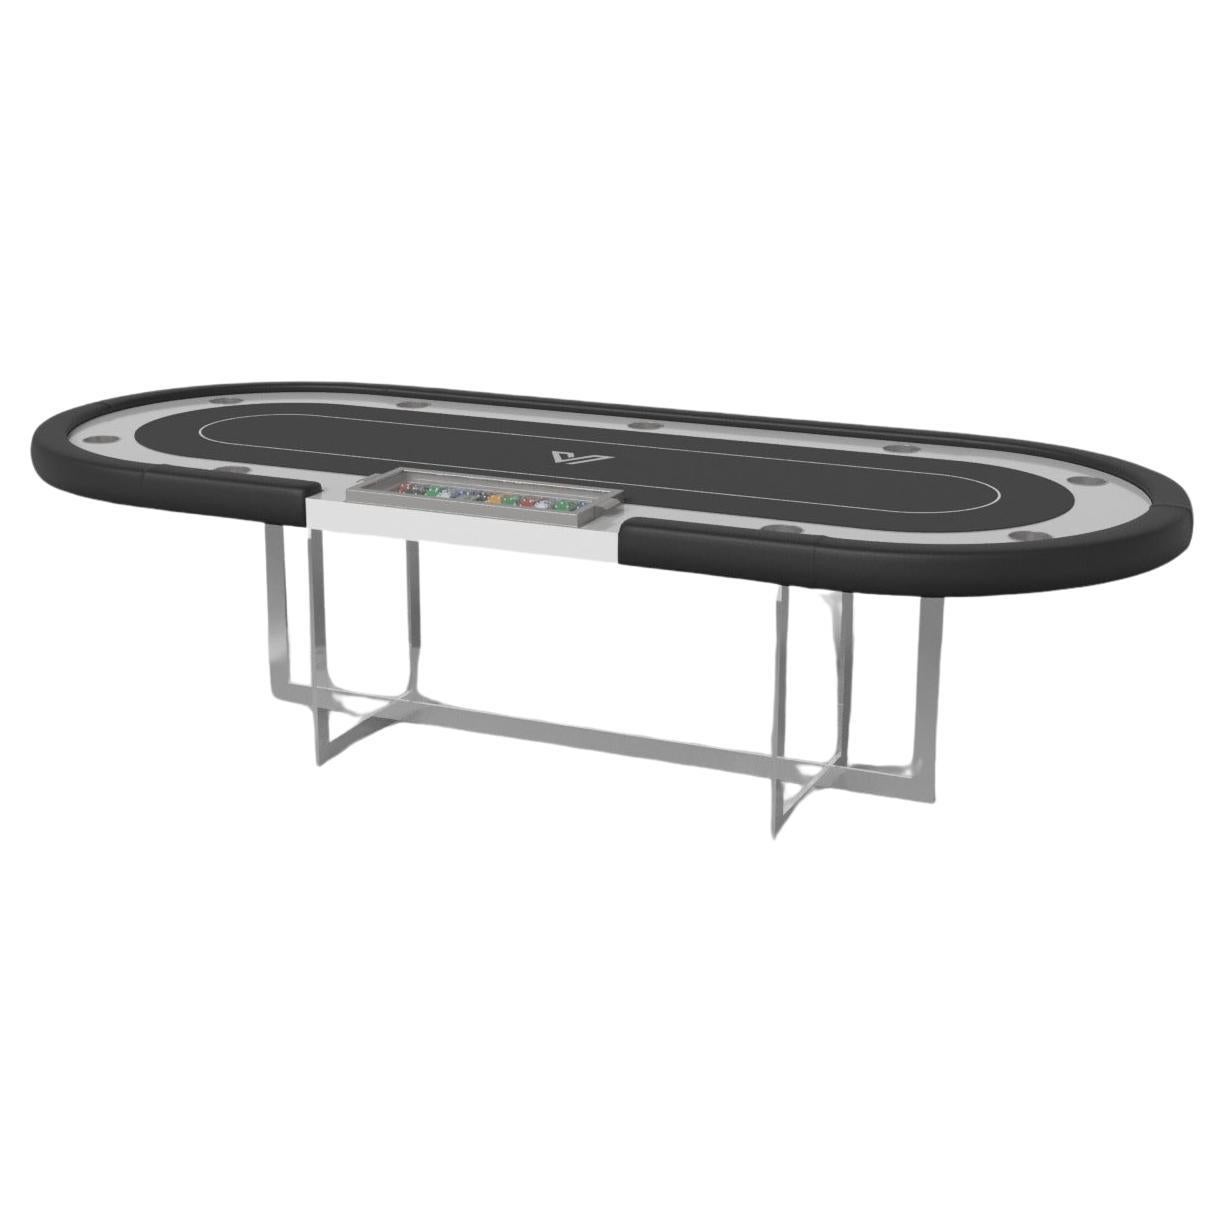 Elevate Customs Beso Poker Tables / Solid Pantone White Color in 8'8" - USA